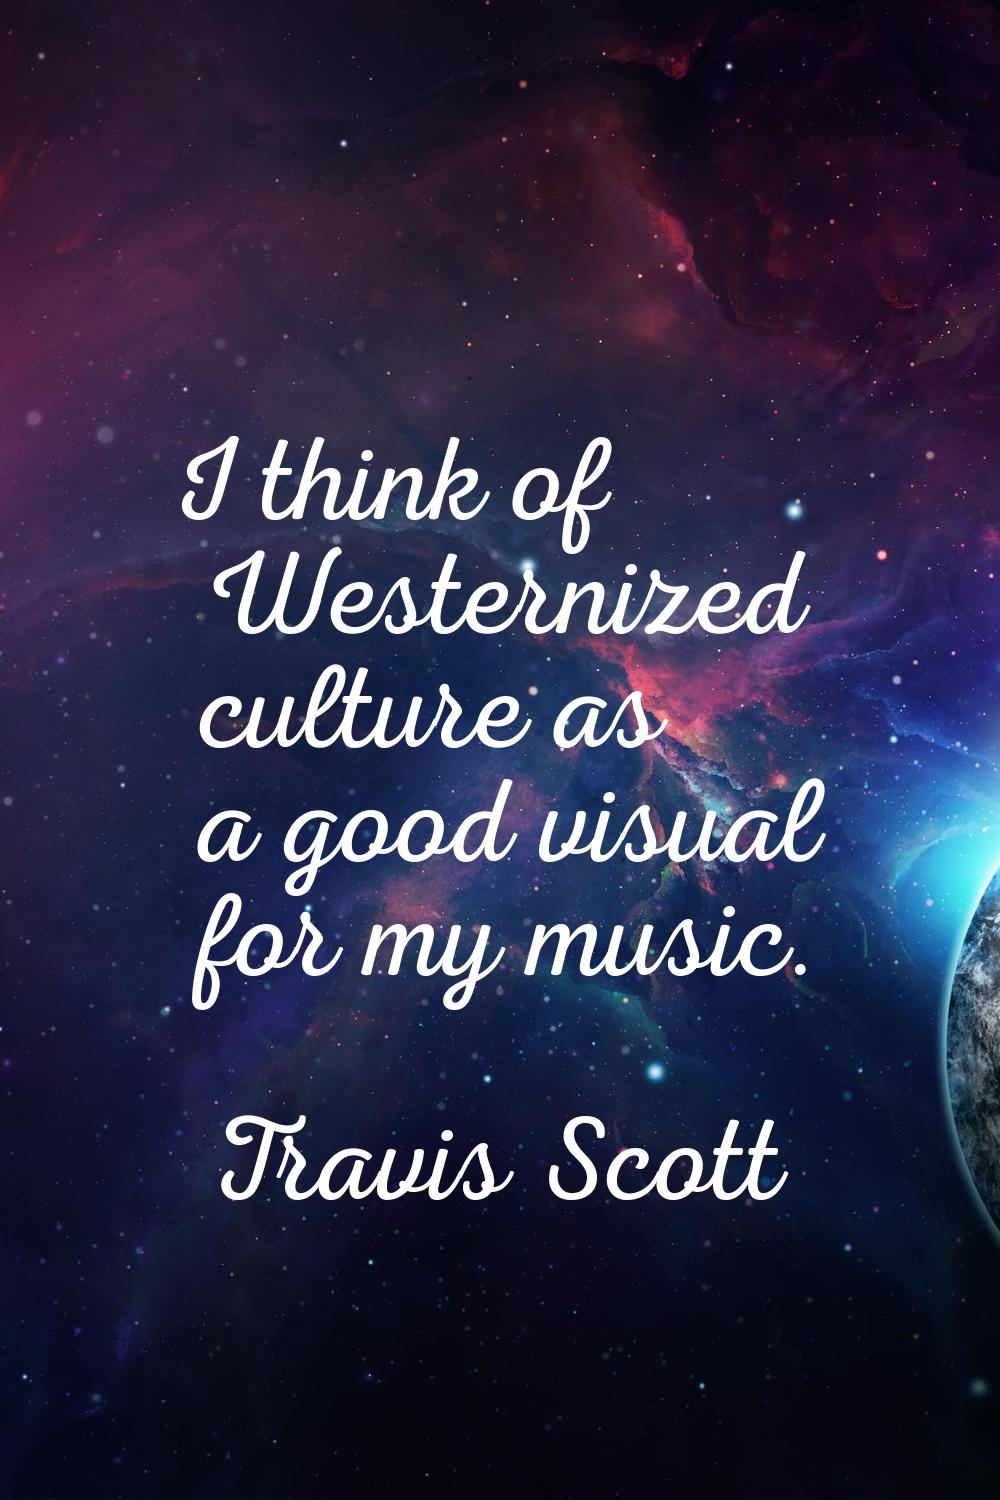 I think of Westernized culture as a good visual for my music.